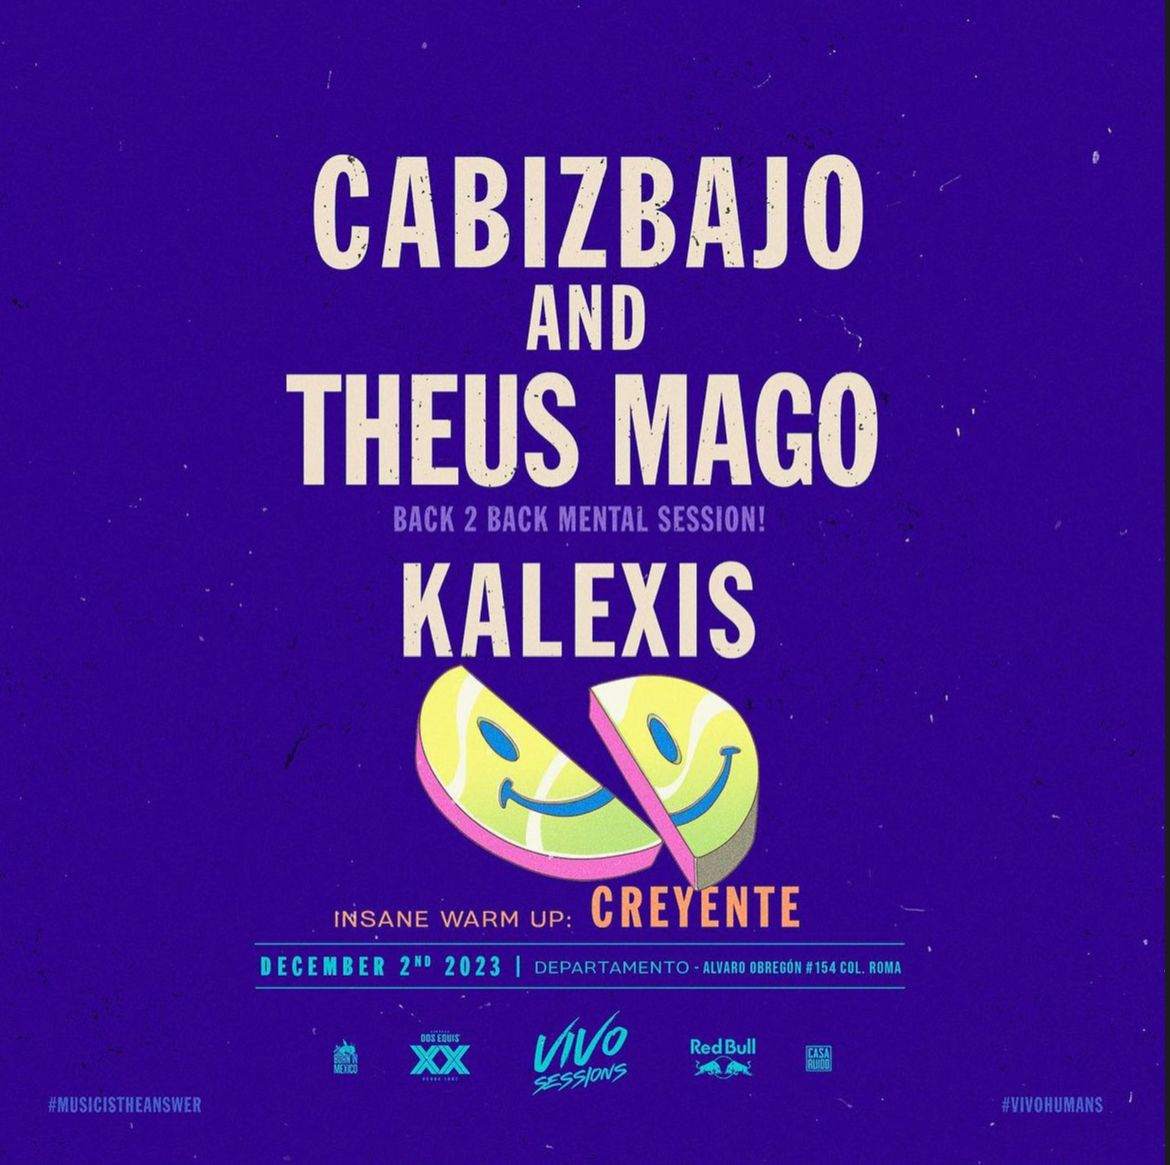 Cabizbajo and Theus Mago Back 2 Back Mental Session! - フライヤー表